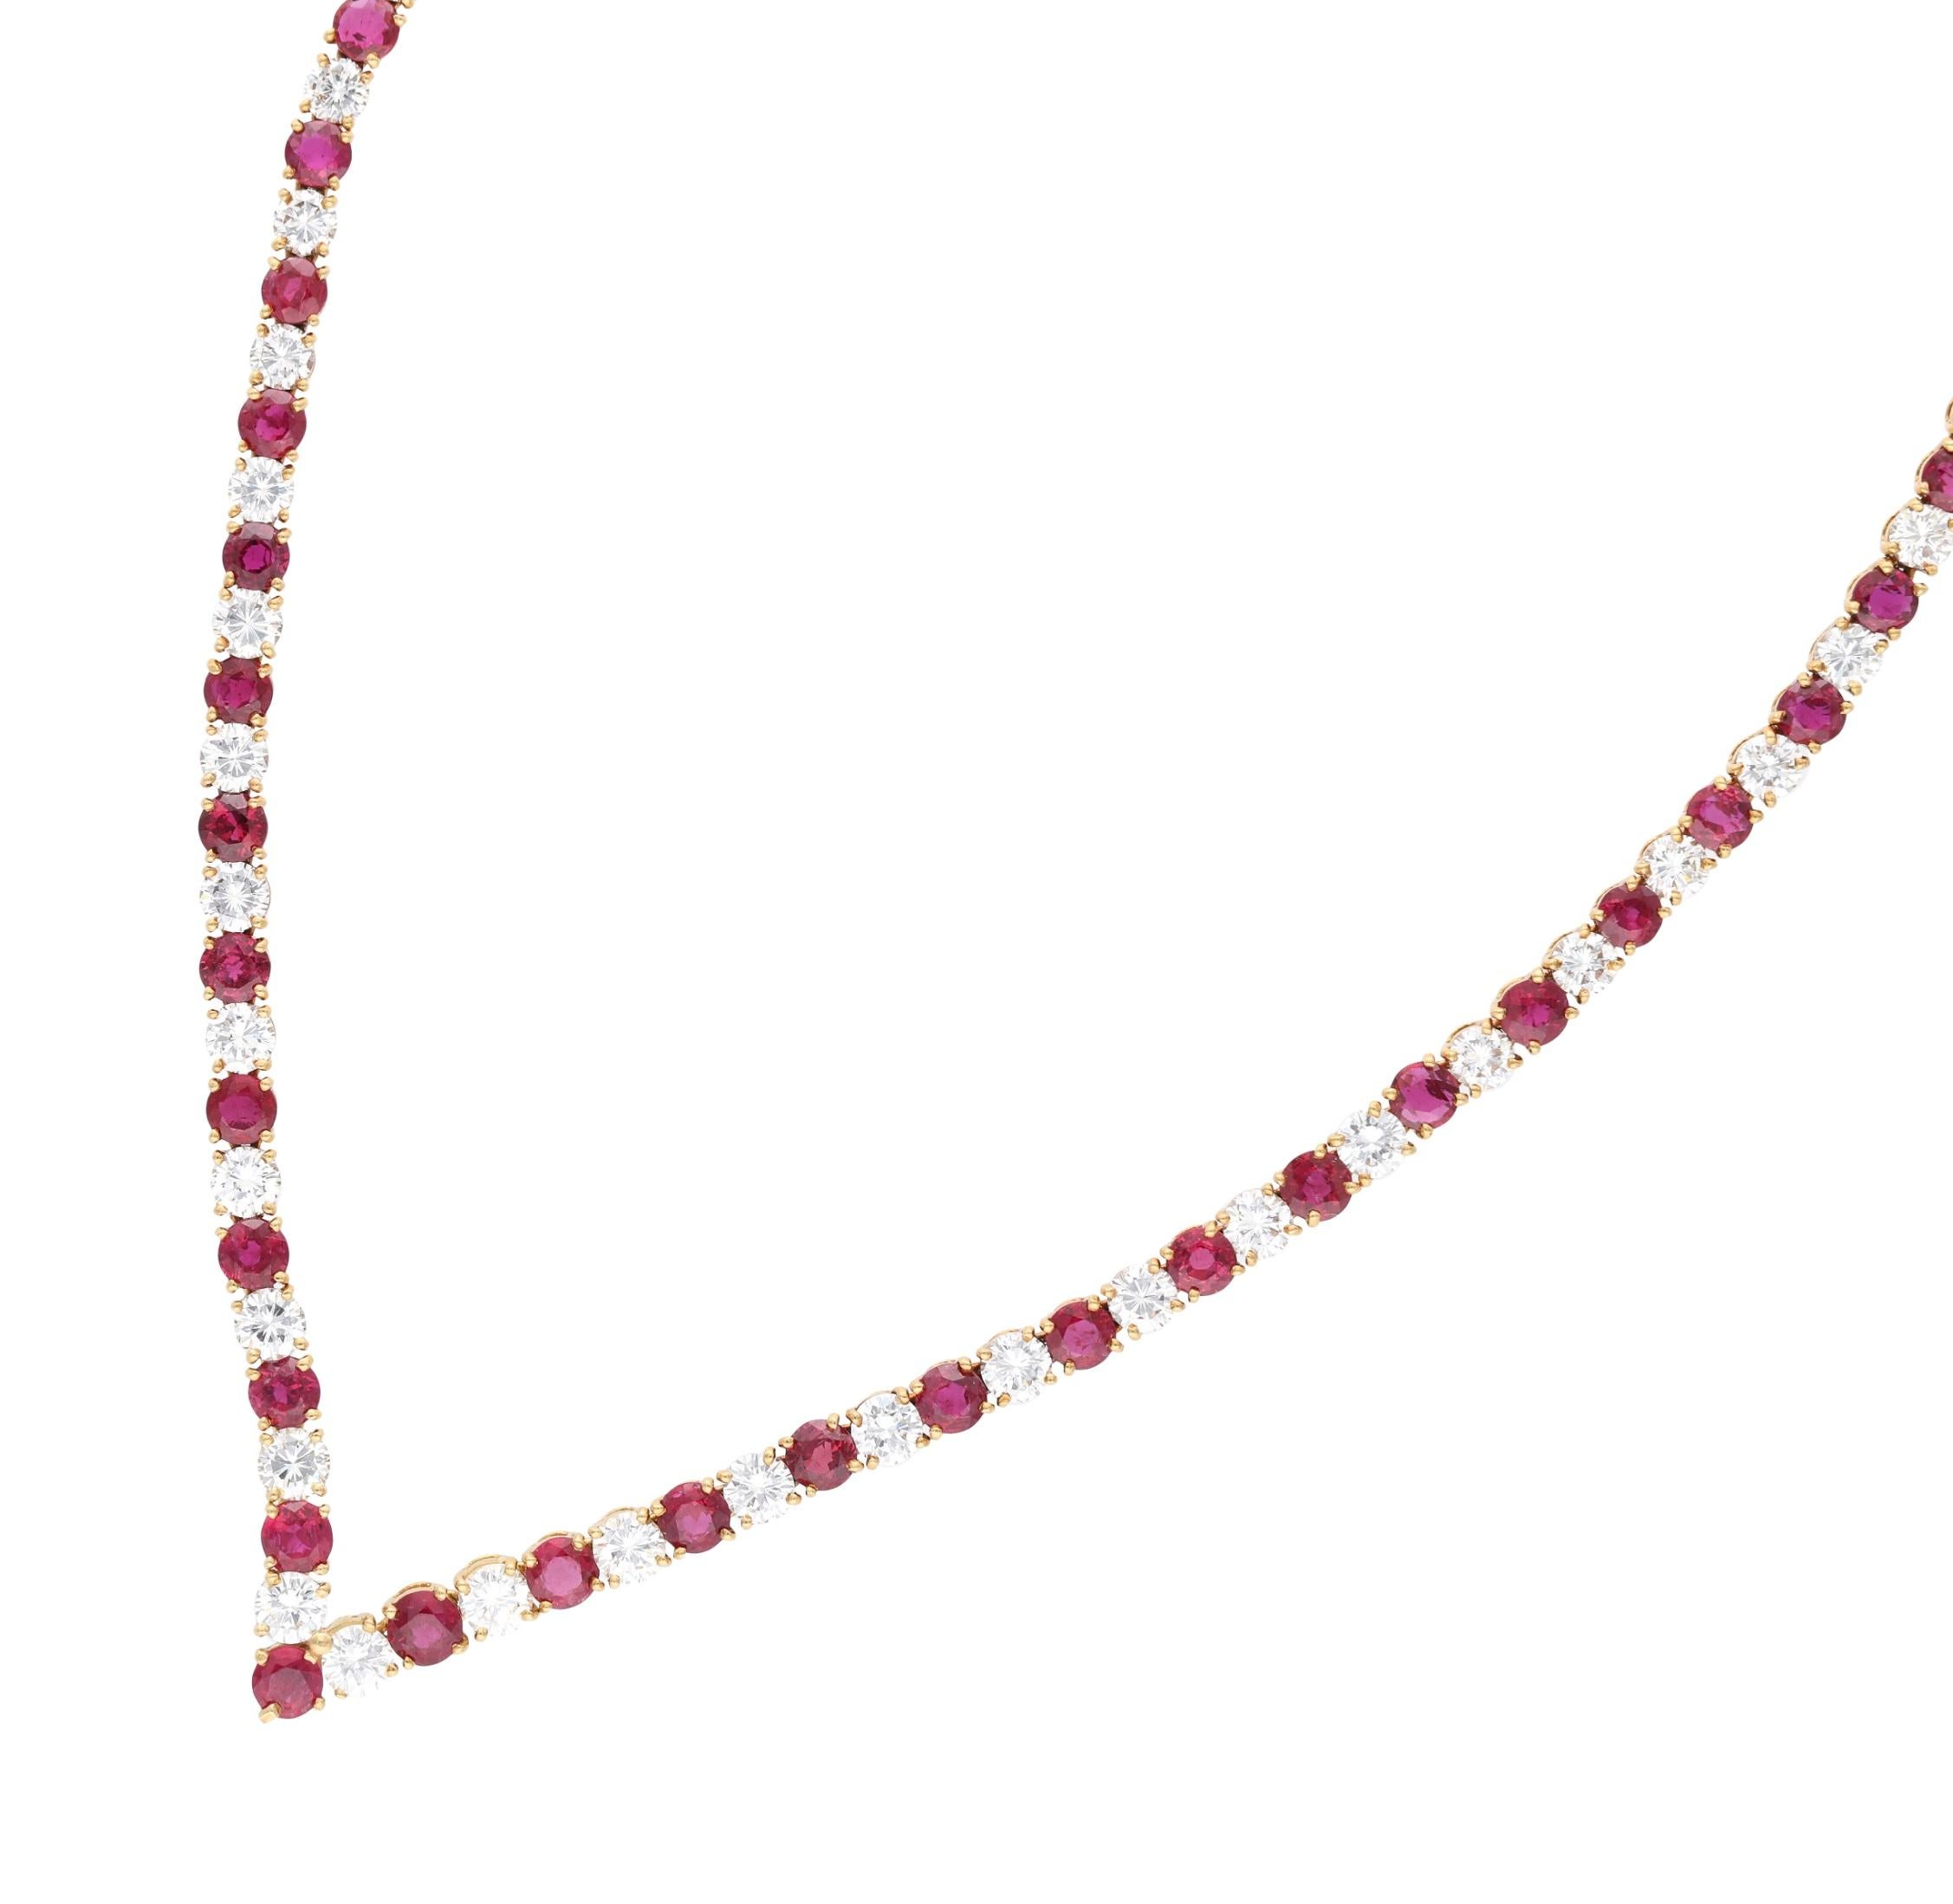 Composed of graduated 52 round rubies and 52 round brilliant cut diamonds.

- Round brilliant cut diamonds weigh a total of approximately 10.70 carats
- Round rubies weigh a total of approximately 14.15 carats
- 14 karat yellow gold
- Total weight